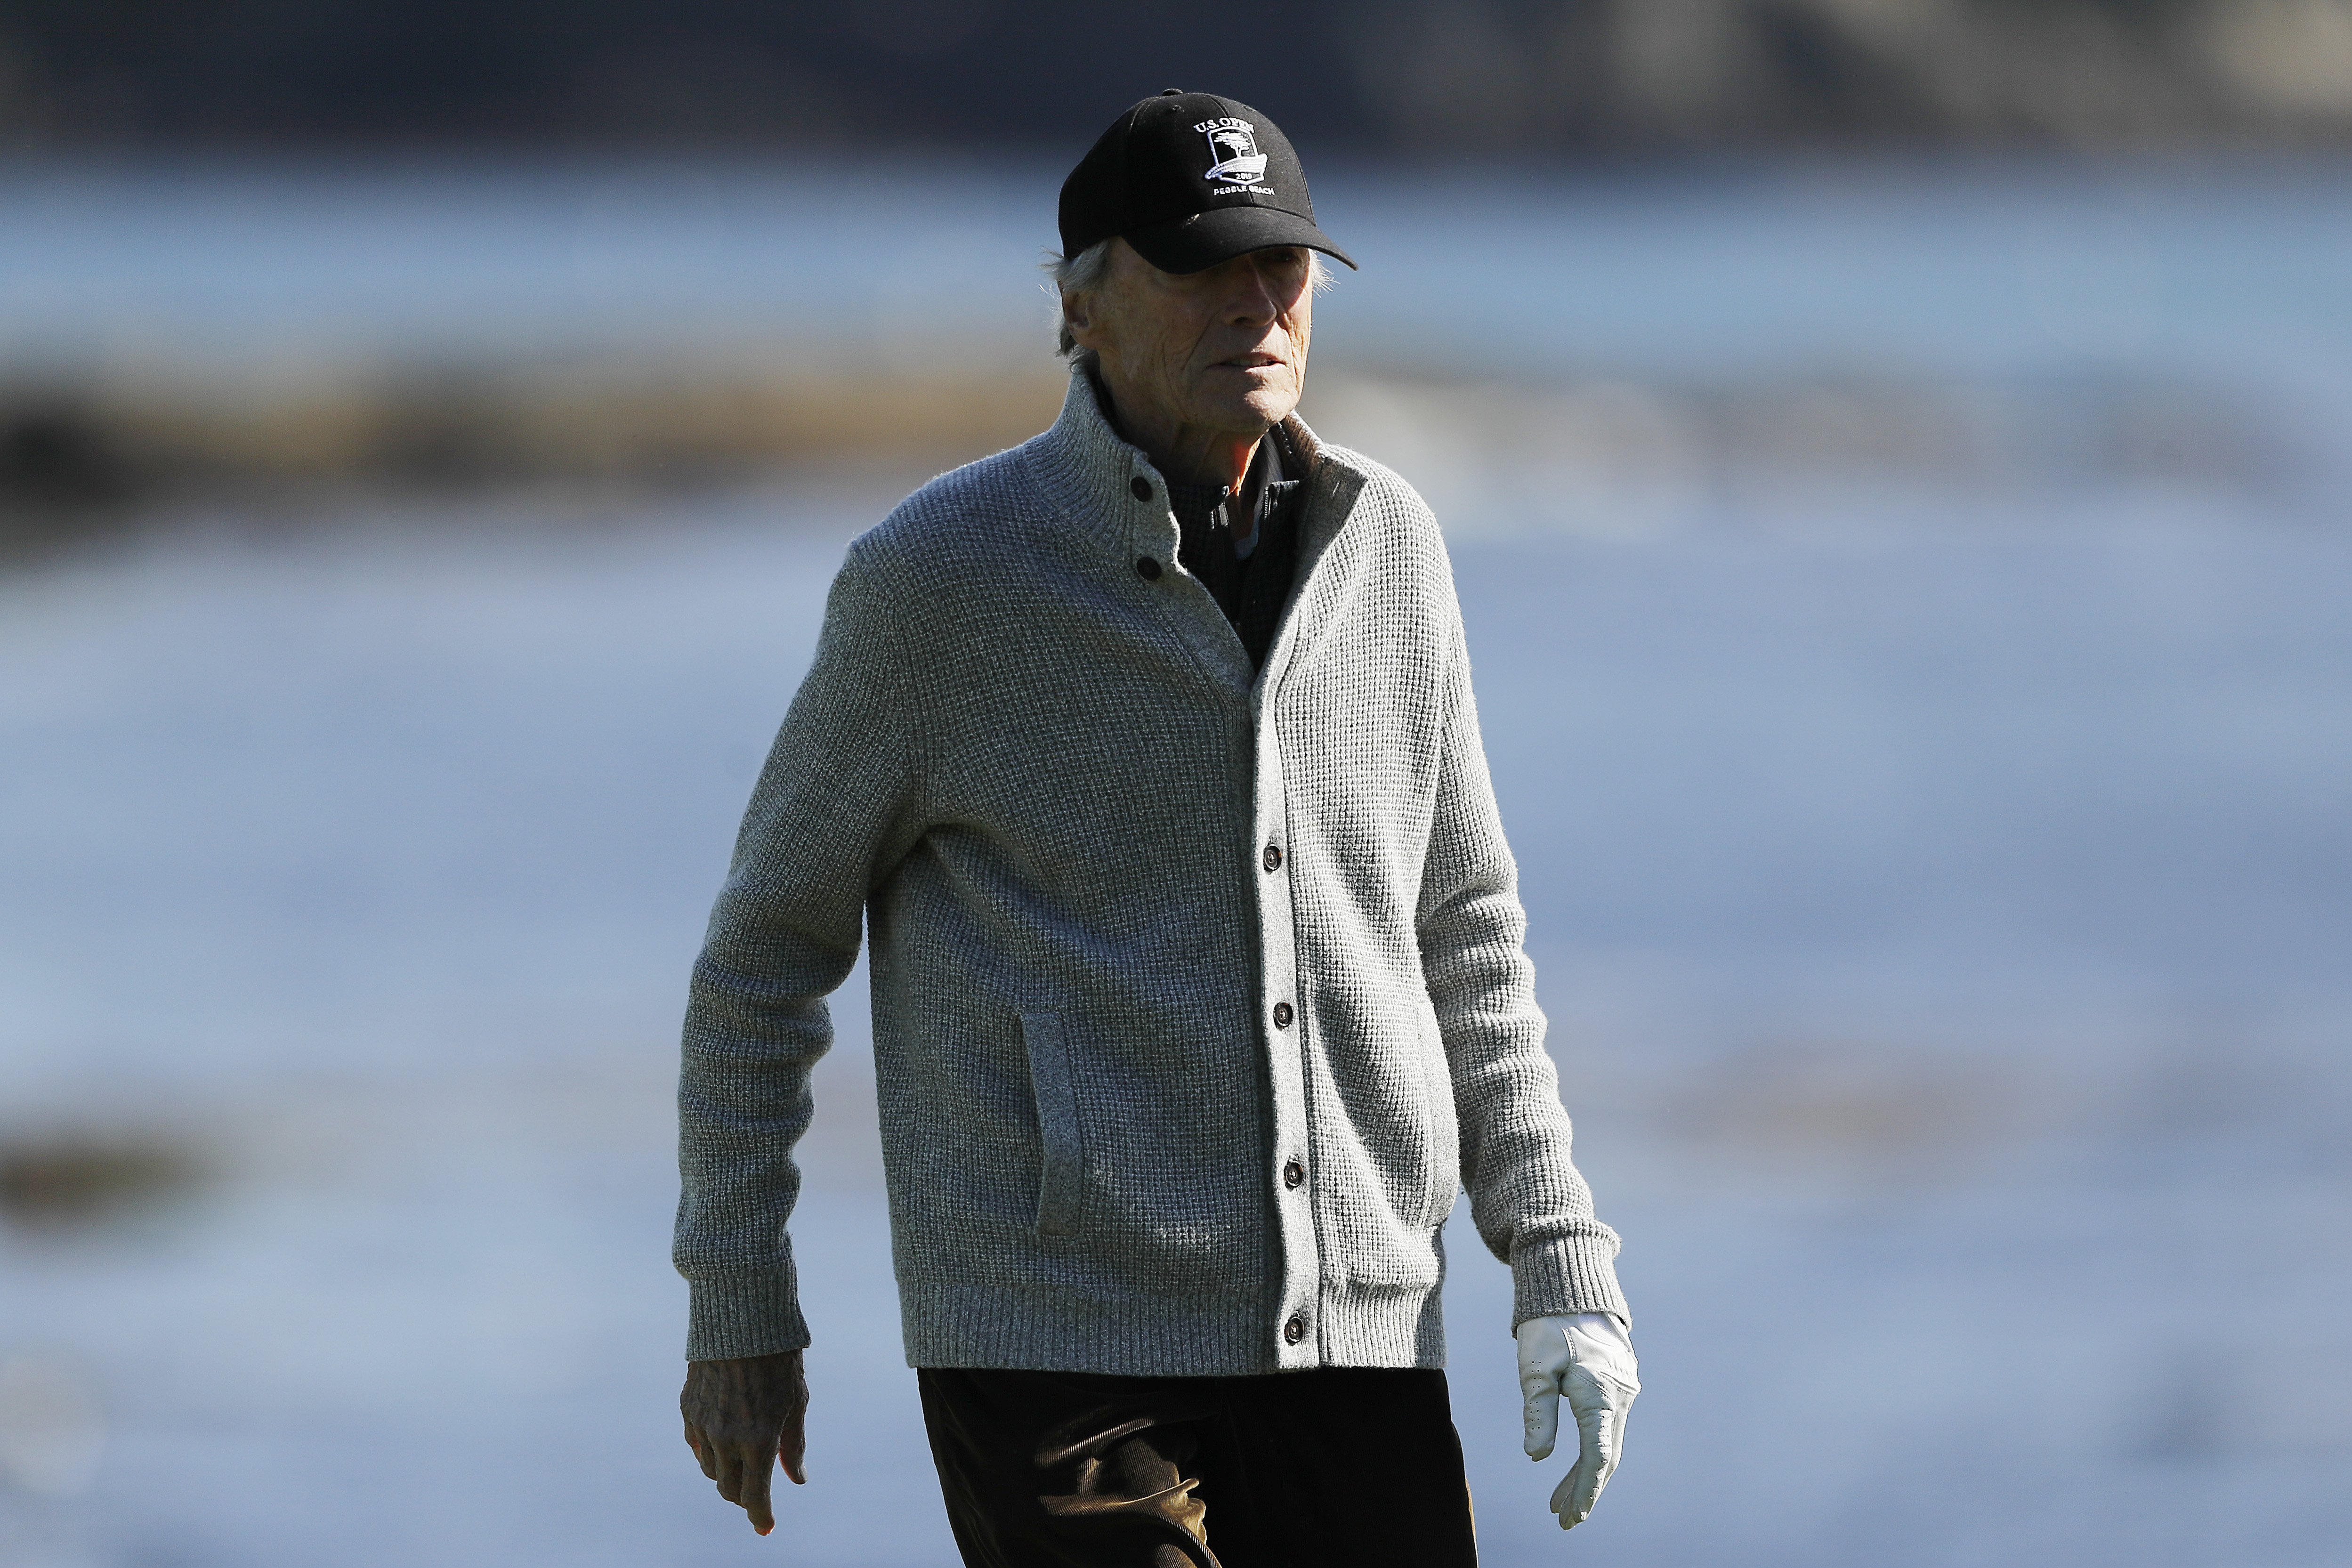 Clint Eastwood at the 3M Celebrity Challenge prior to the AT&T Pebble Beach Pro-Am at Pebble Beach Golf Links on February 5, 2020, in Pebble Beach, California. | Source: Getty Images 